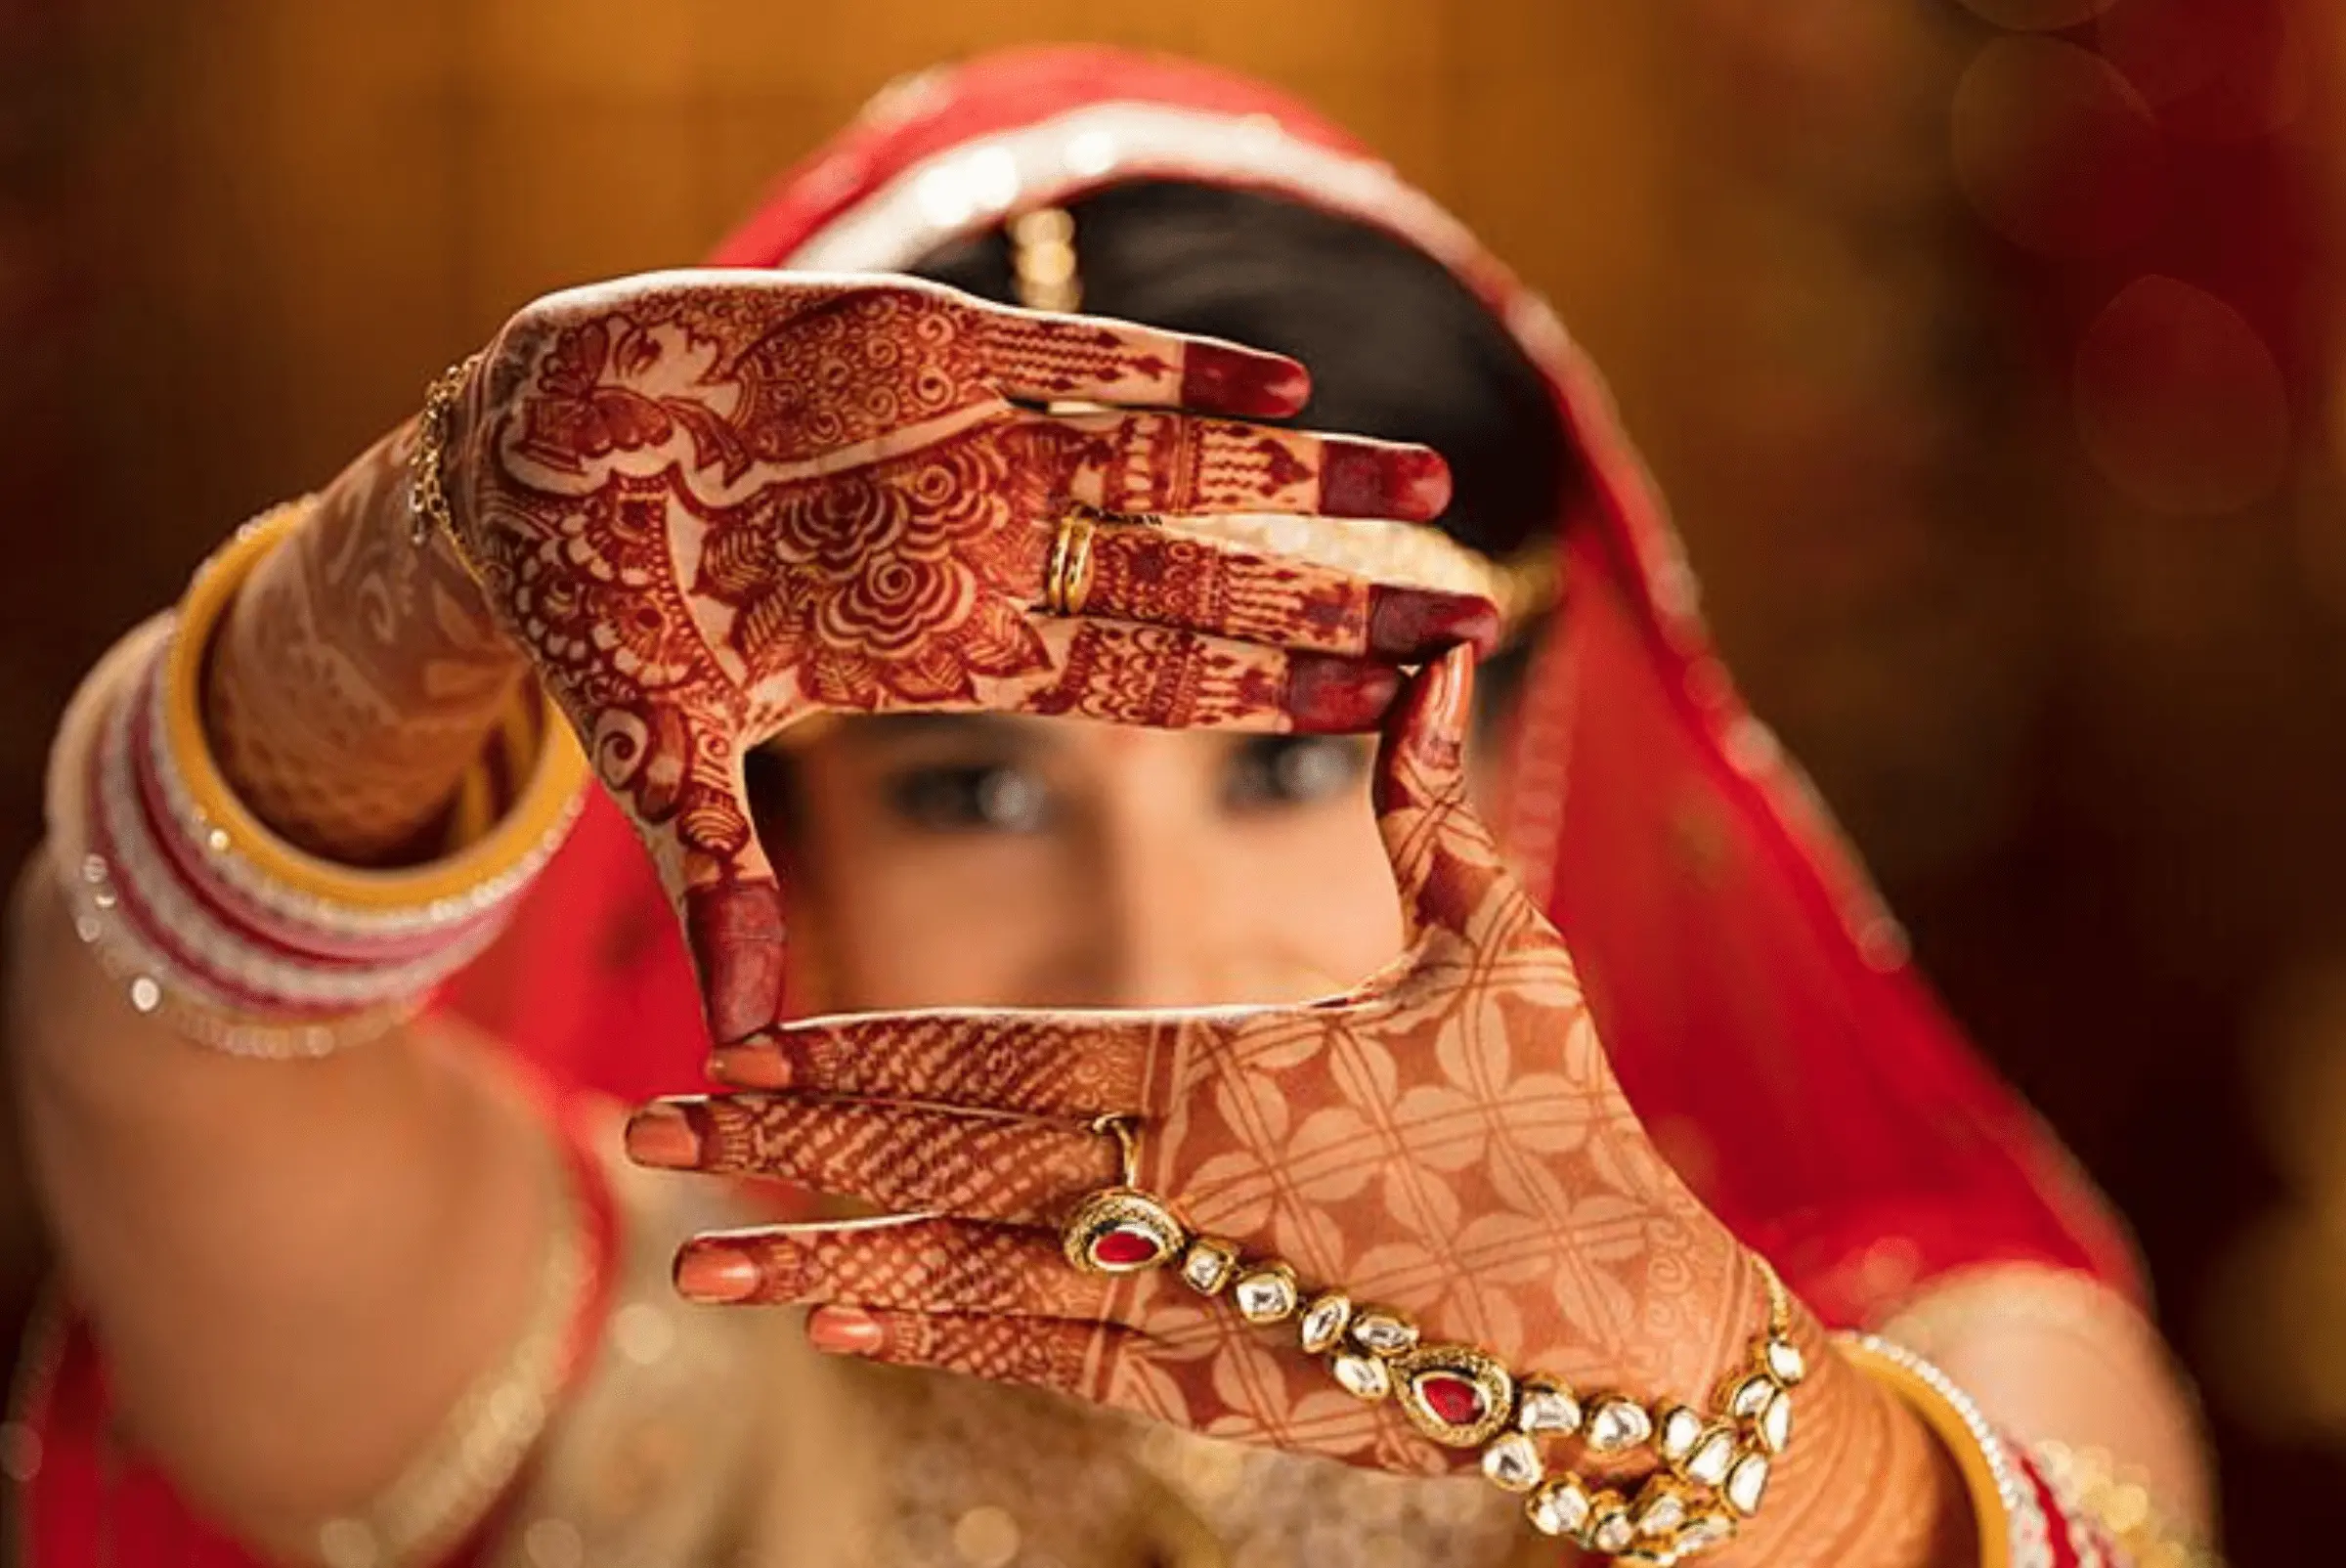 Exquisite Mehndi Designs for the Bride: A Guide to Beautiful Henna Art